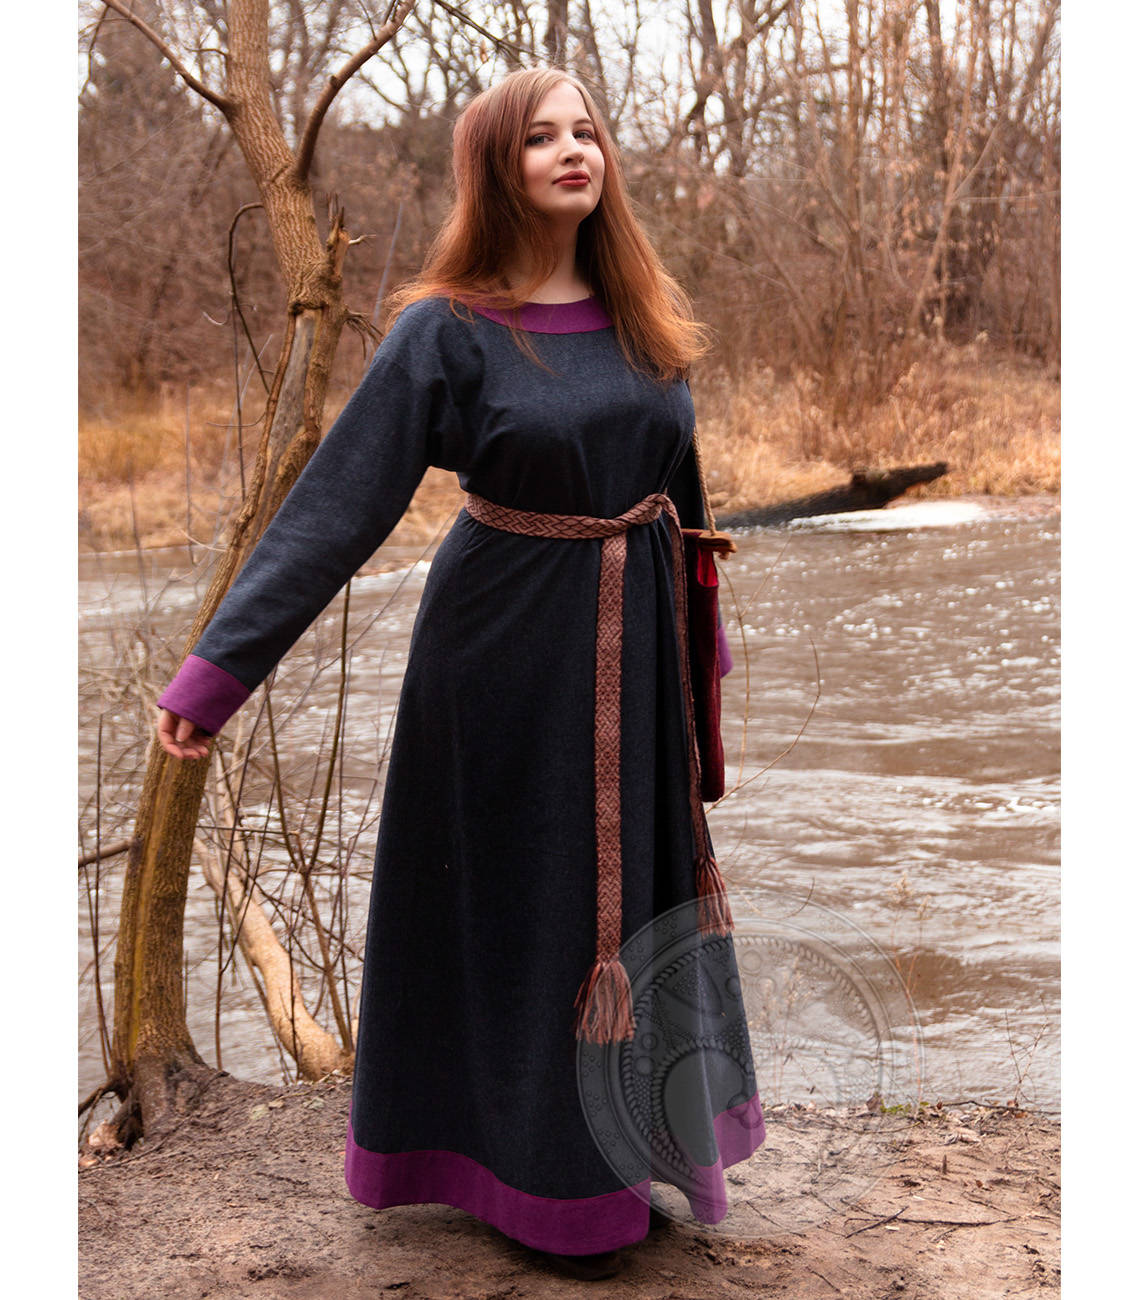 Early Medieval wool dress with wool hems